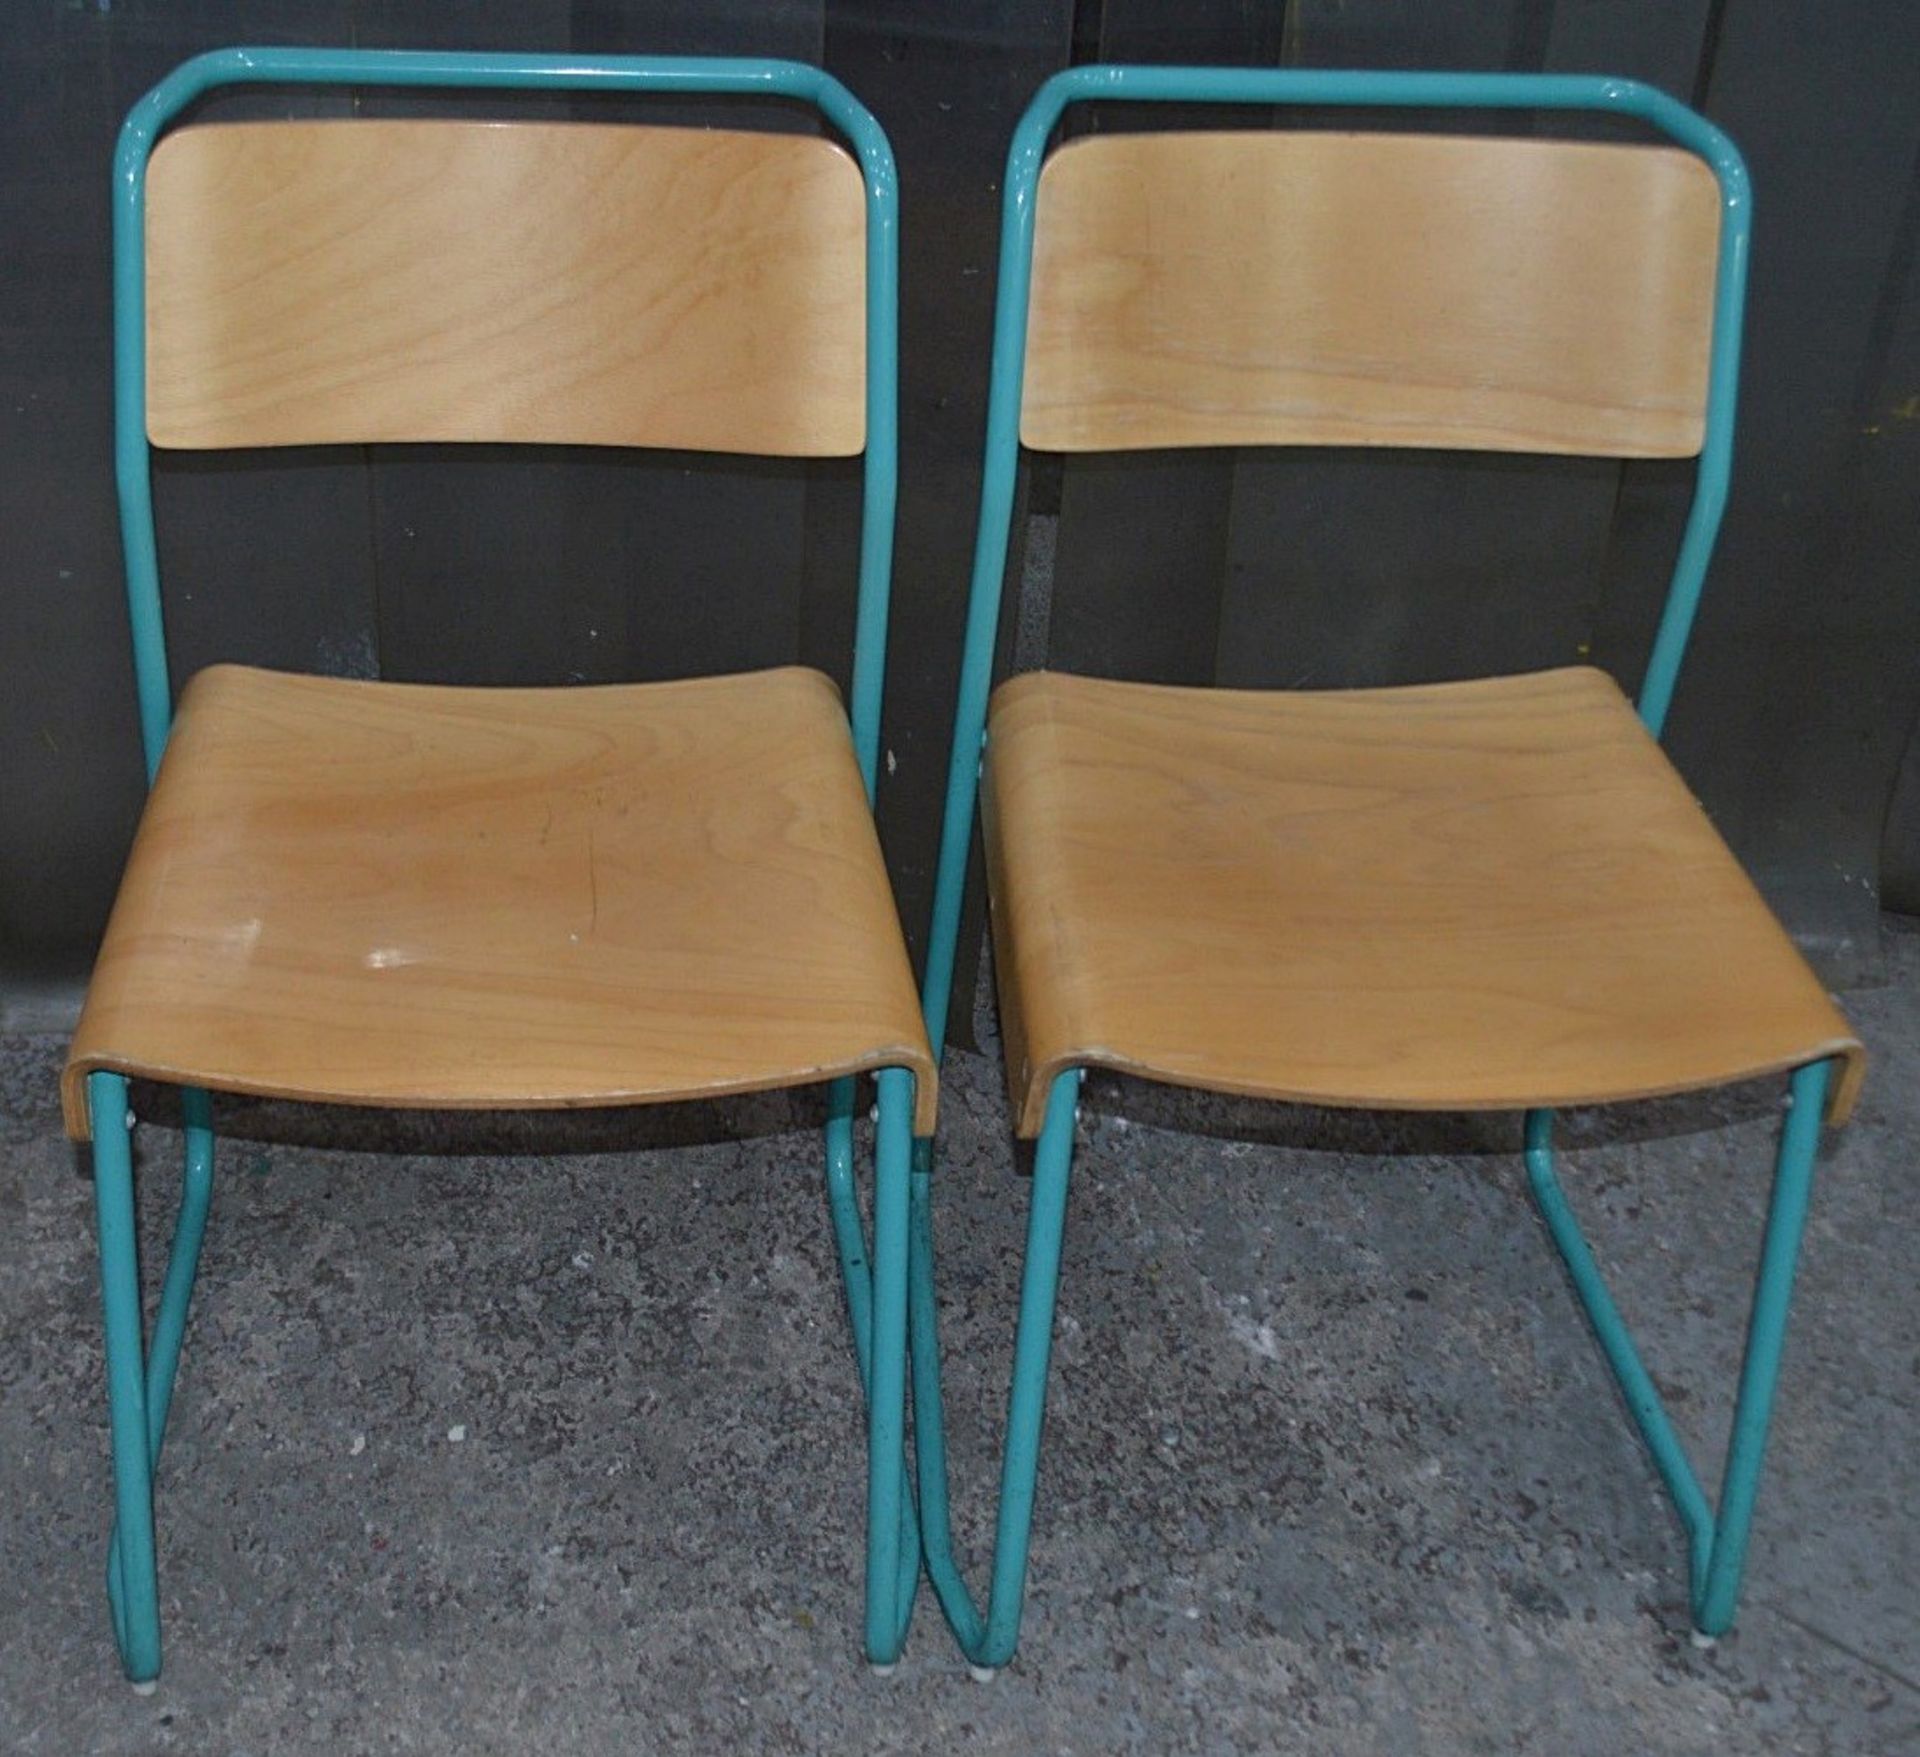 12 x Contemporary Stackable Bistro / Bar Chairs With Metal Frames In Teal With Curved Vanished - Image 3 of 11